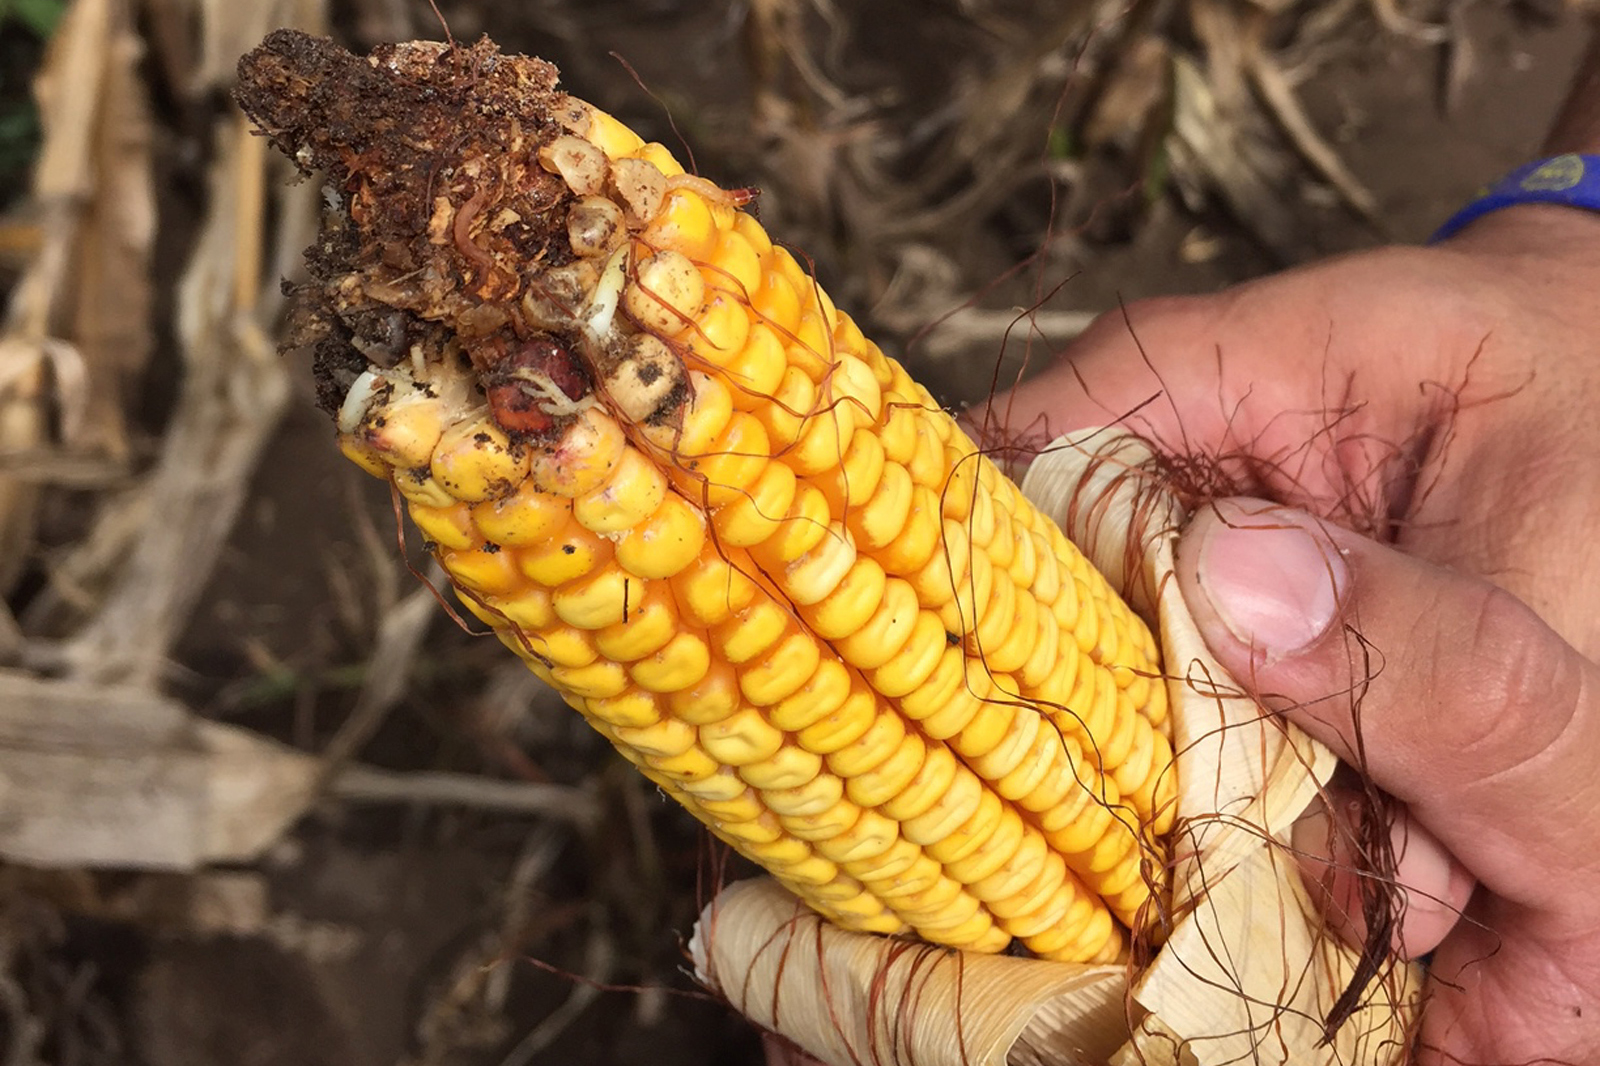 Maize harvested in Argentina in 2016. This corn was intended for export but was contaminated with mycotoxins. [Photo: Newton Padovani, Nutriad International]